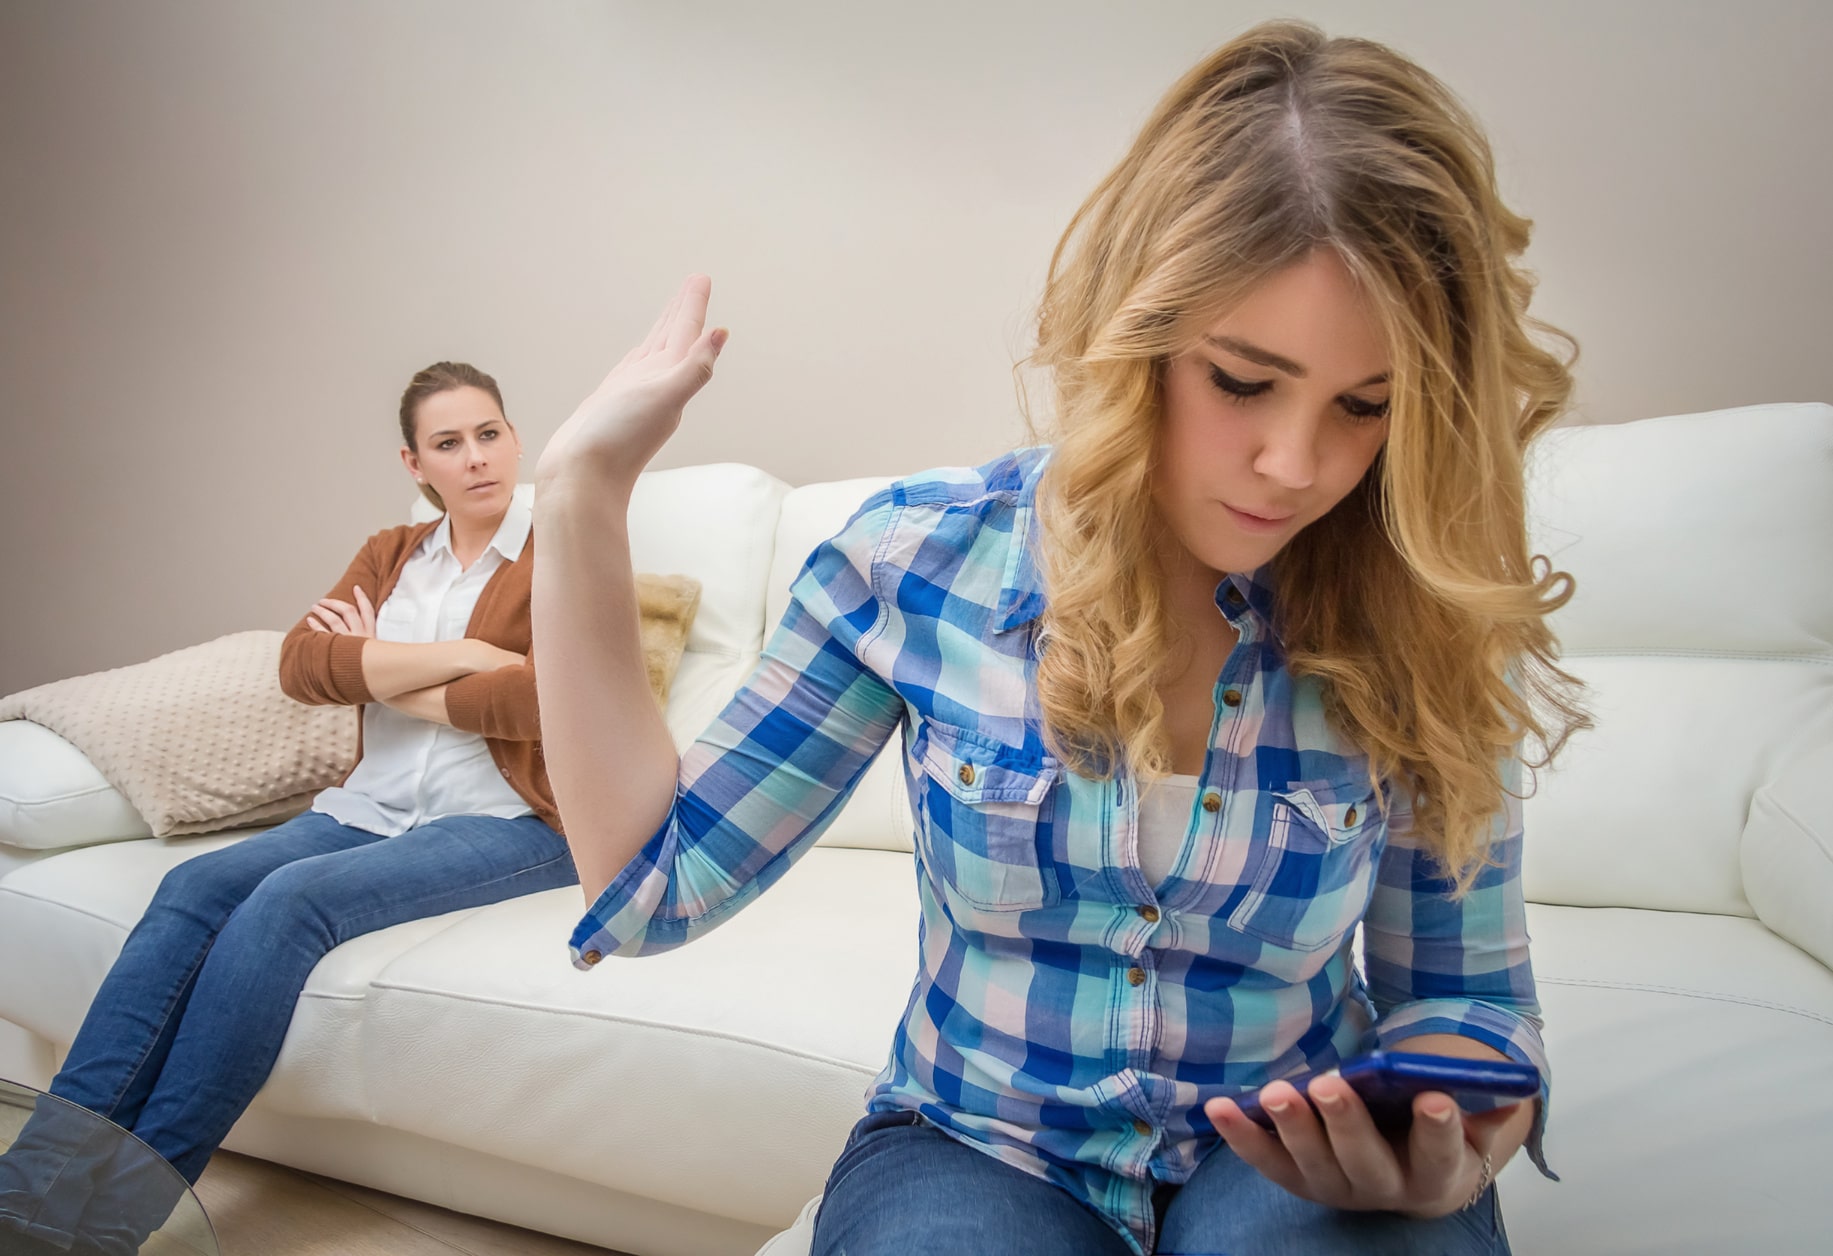 Teenage daughter looking messages in a smartphone and ignoring her furious mother. Bad family communication concept by new technologies